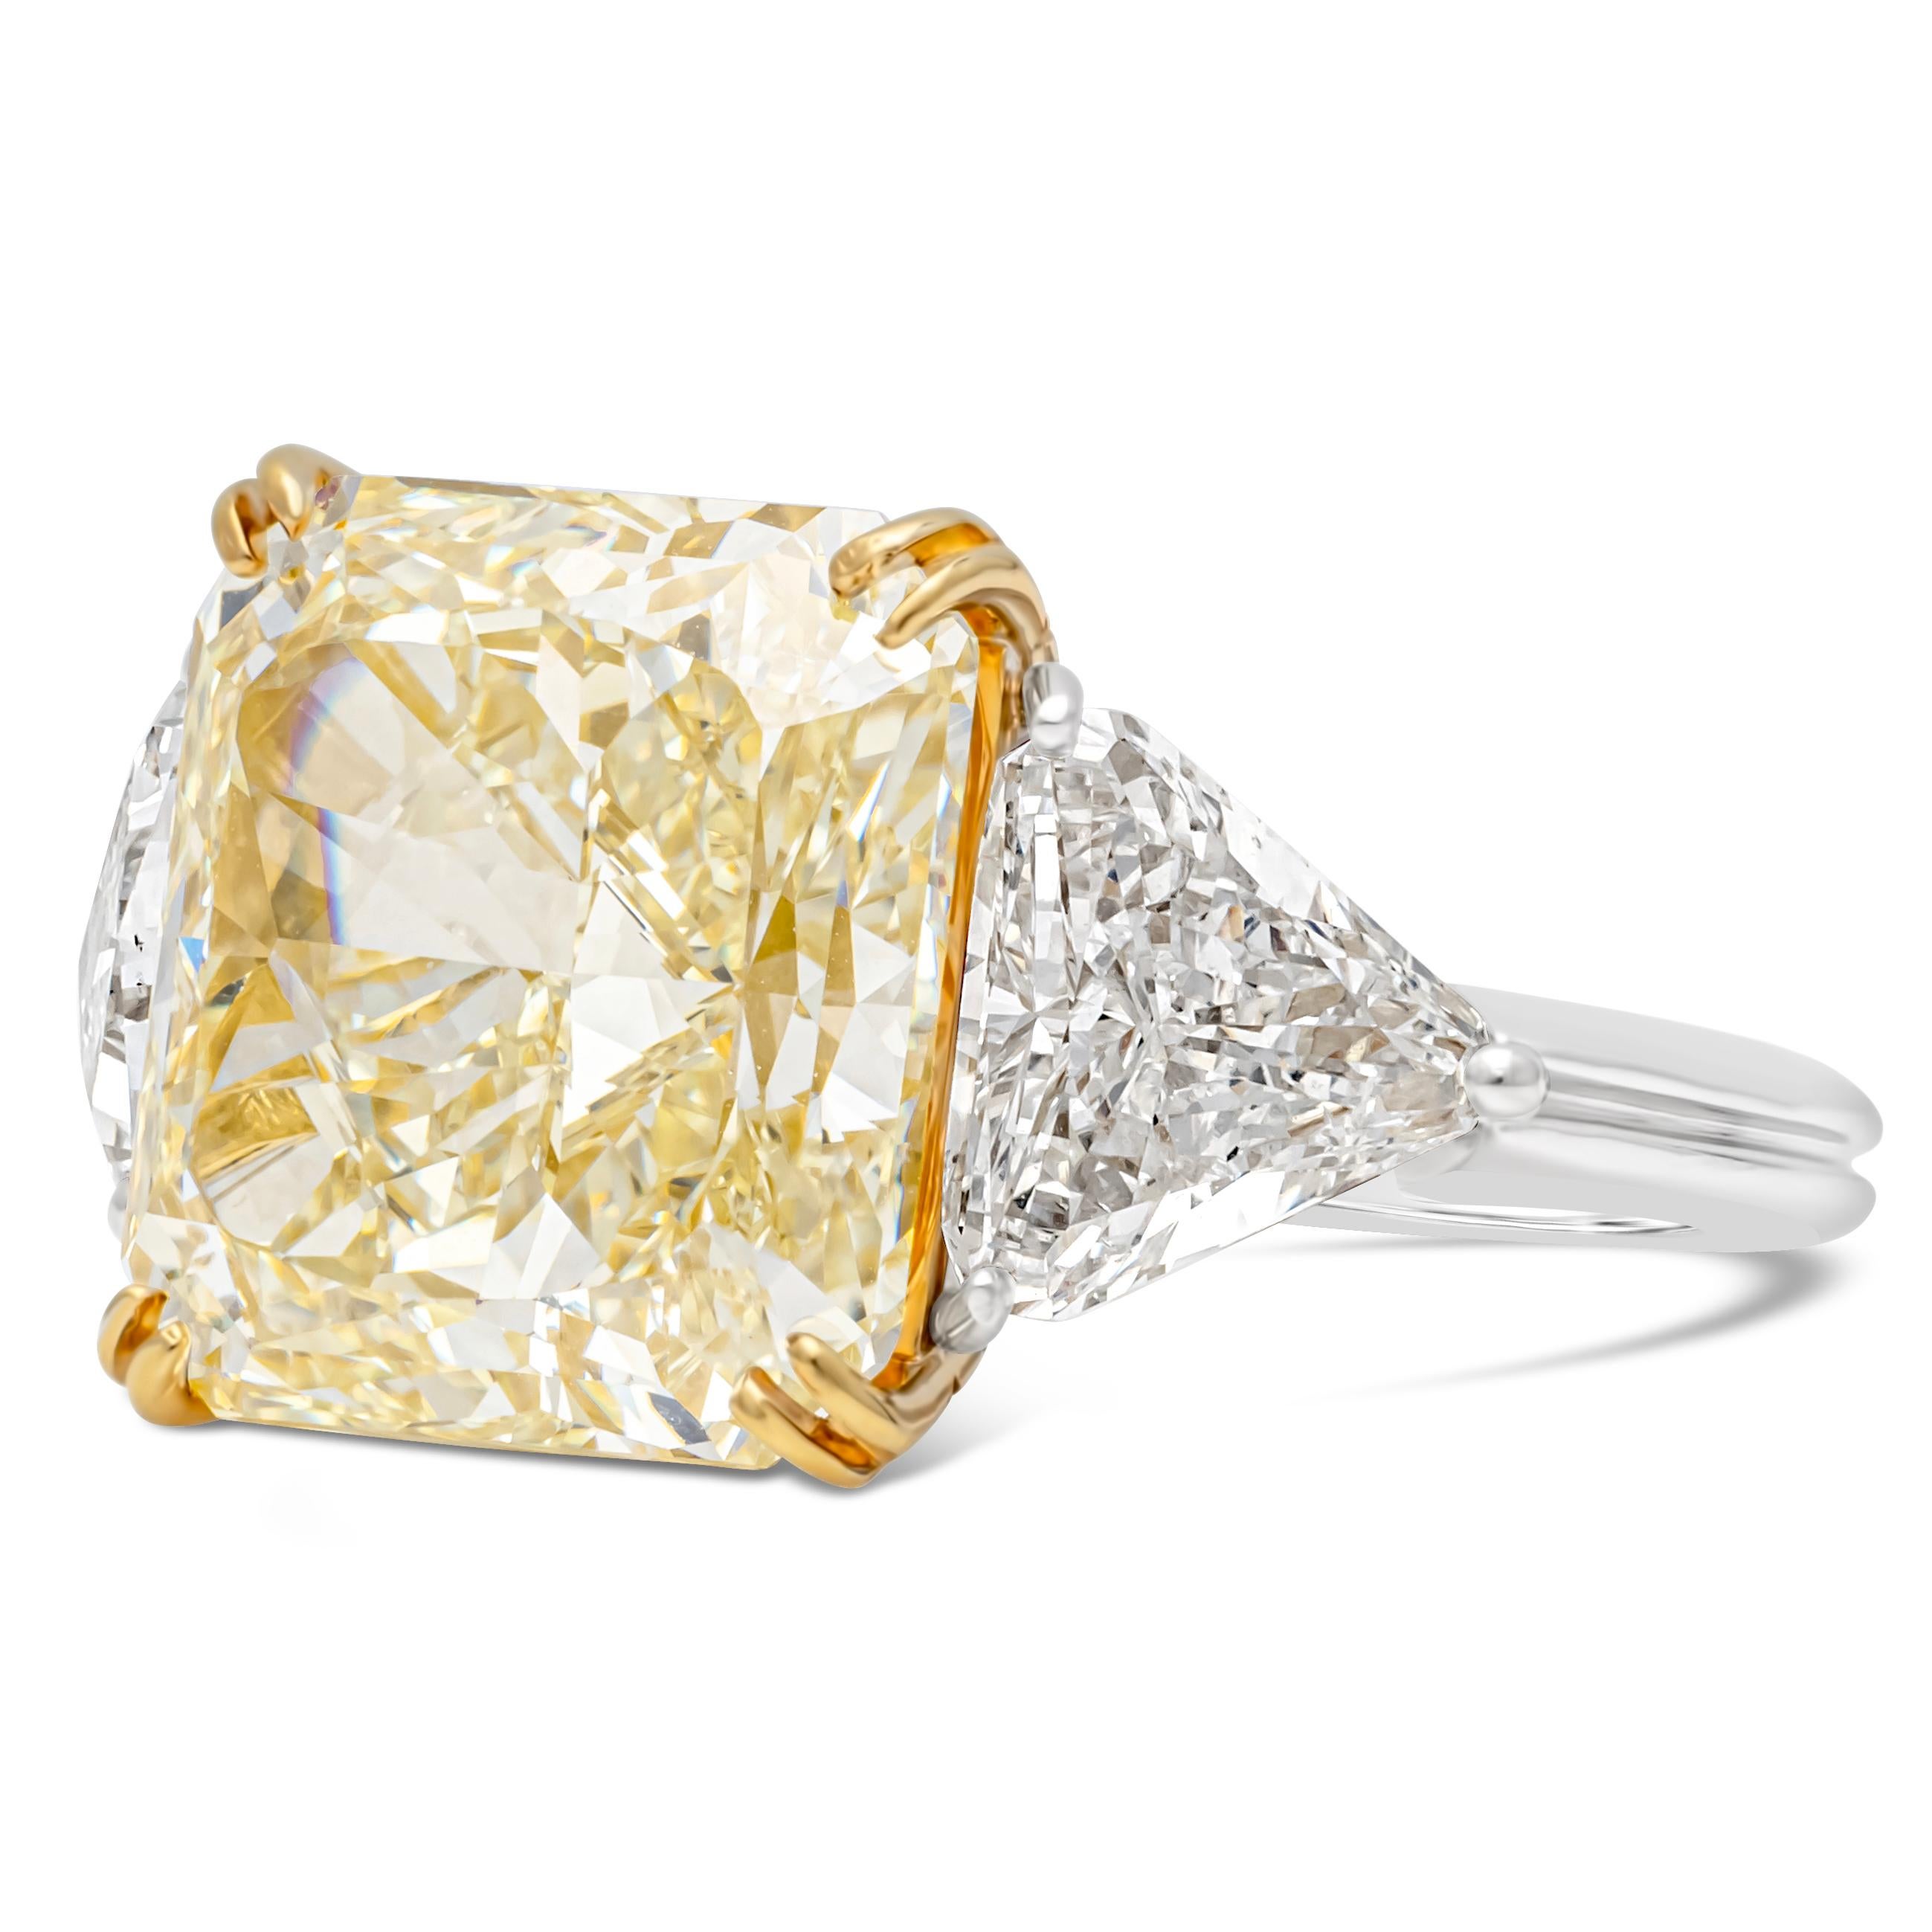 This color rich three stone engagement ring by Oscar Heyman features a 9.03 carats radiant cut fancy yellow diamond certified by GIA as fancy yellow color, VVS1 in clarity. Set in a classic eight prong 18K Yellow Gold basket setting. Flanked by